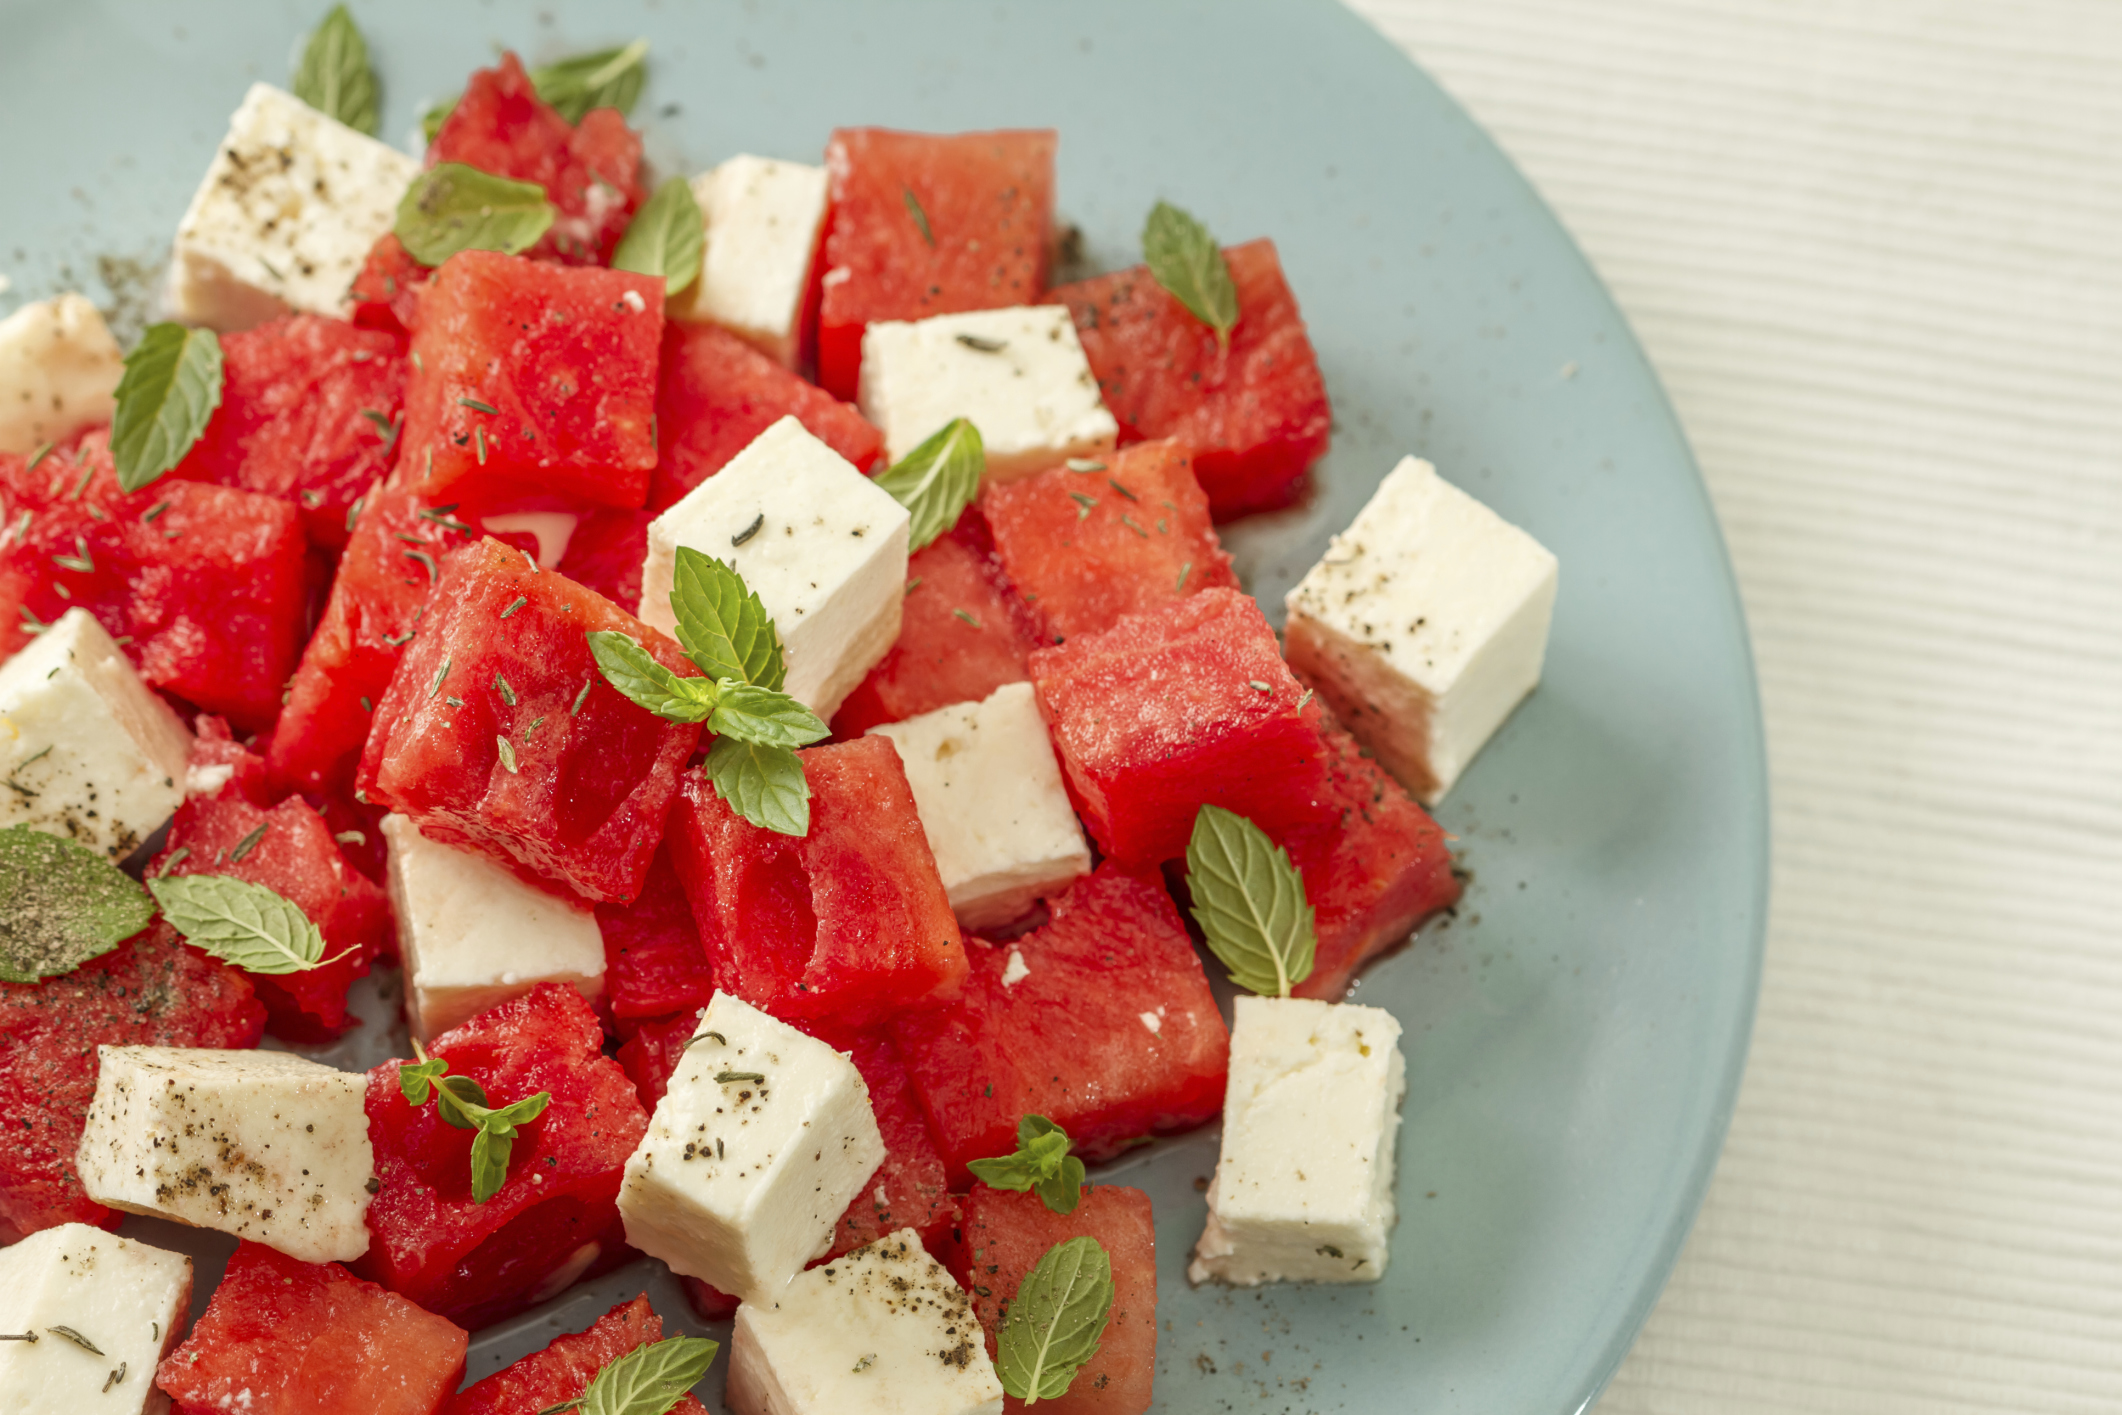 Salad with watermelon and feta cheese